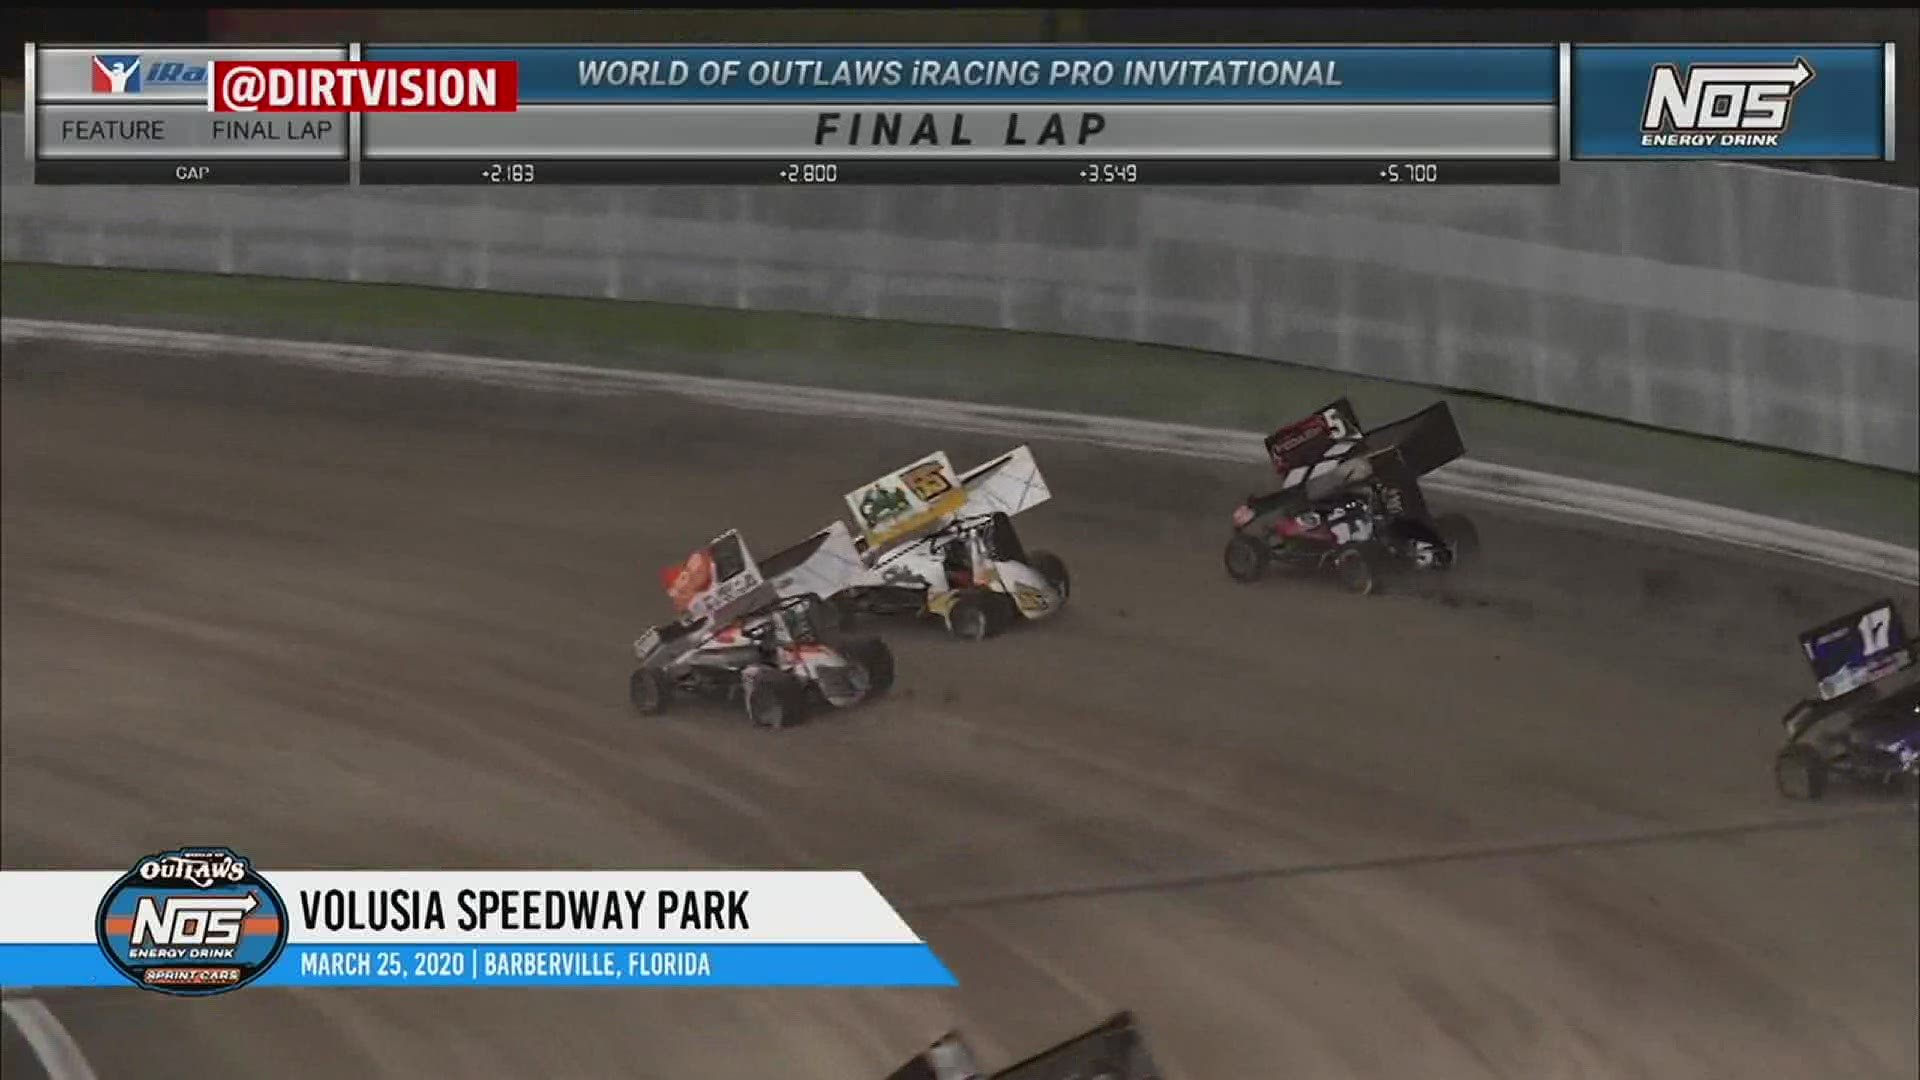 Three Pennsylvania drivers finish in the top 10 in the first World of Outlaws iRacing Invitational.